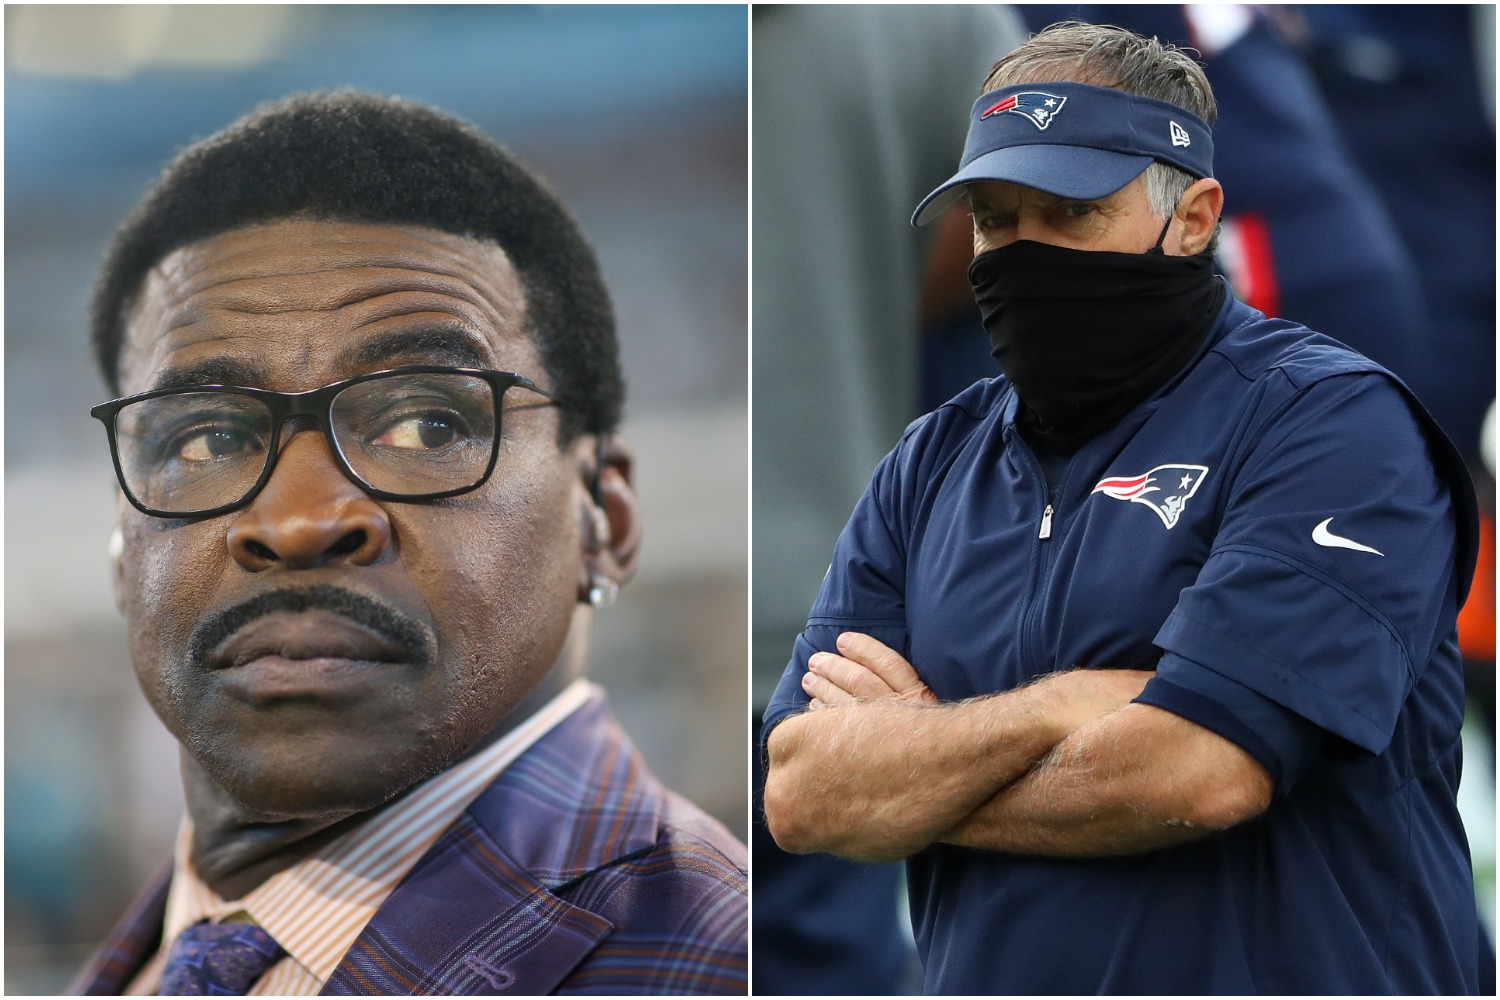 Michael Irvin may save Bill Belichick from suffering a major blow to his legacy if Patriots WR N'Keal Harry accepts his invitation.